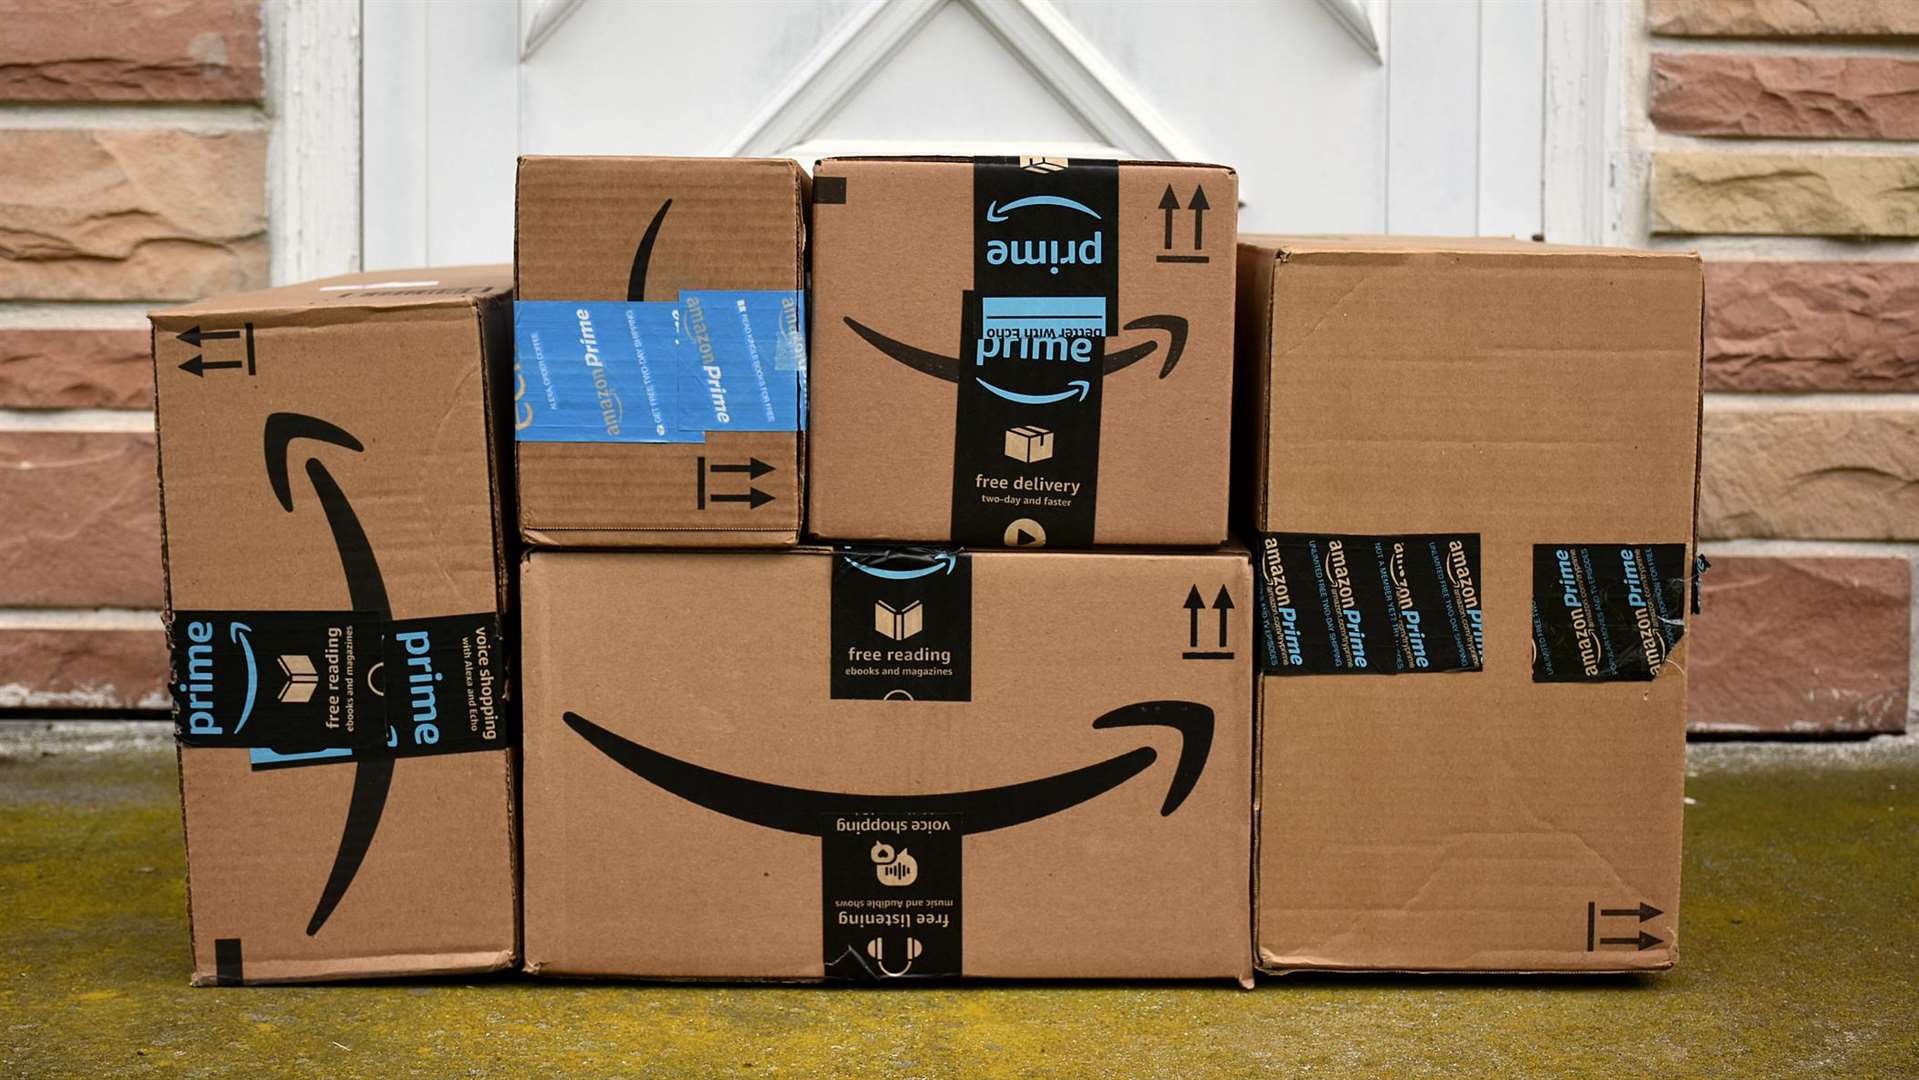 Amazon Prime Day gets underway on Monday, July 16 with over million special offers up for grabs